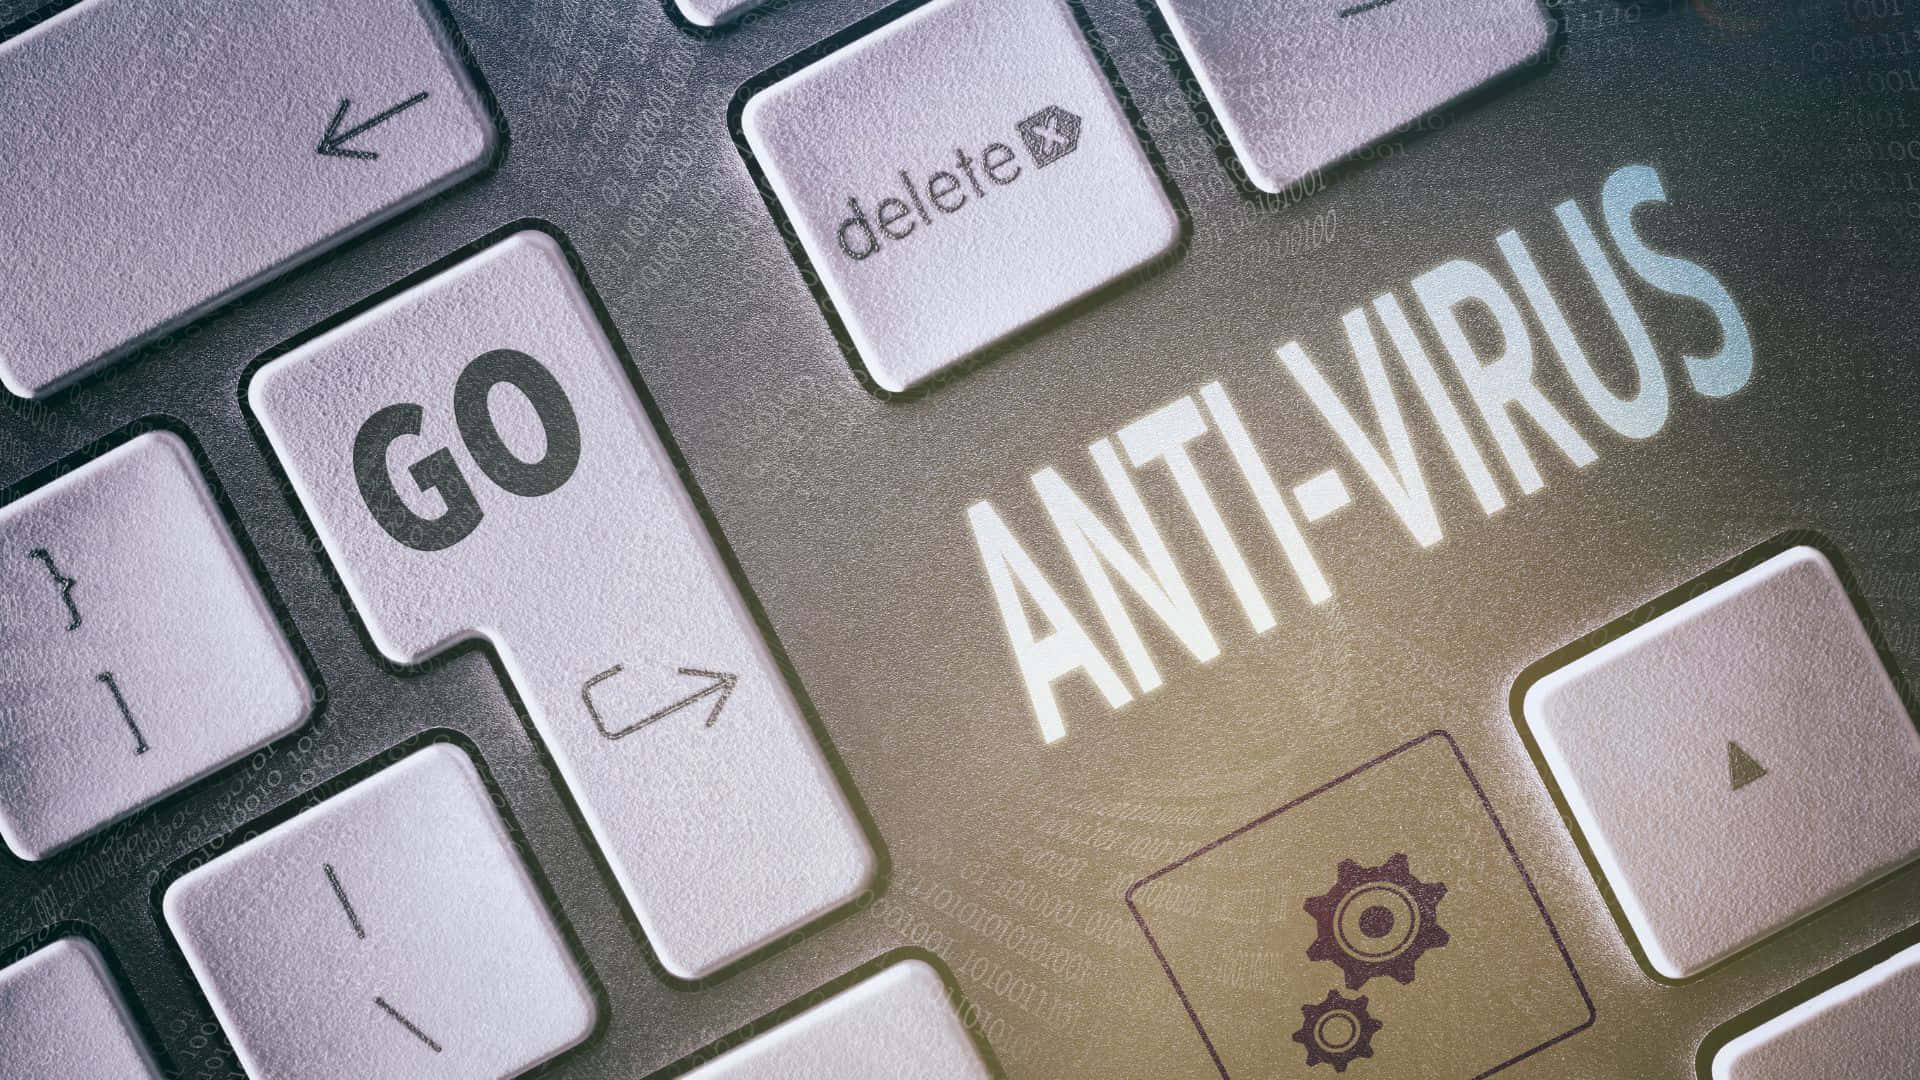 Antivirus Etched On The Keyboard Wallpaper